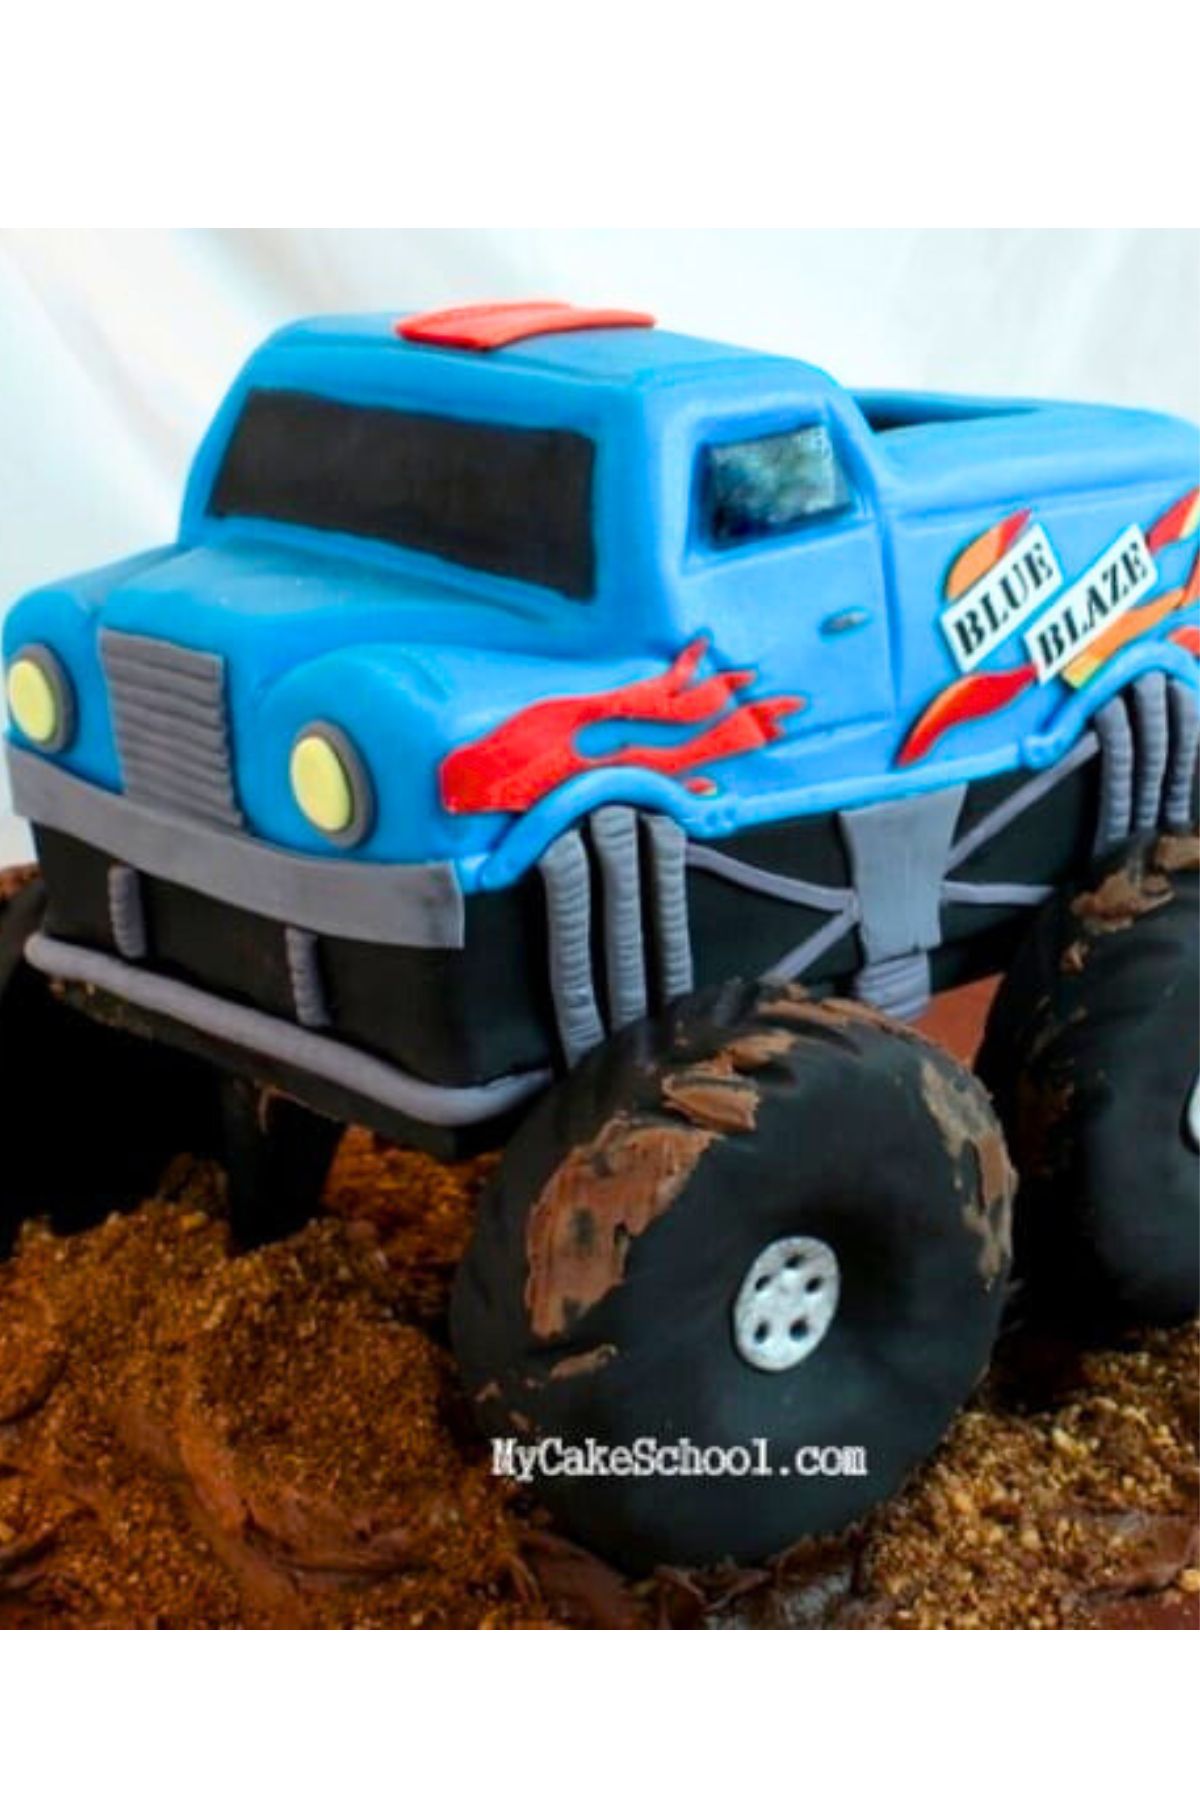 Monster Truck Cake, covered in blue fondant with red flames on the side.